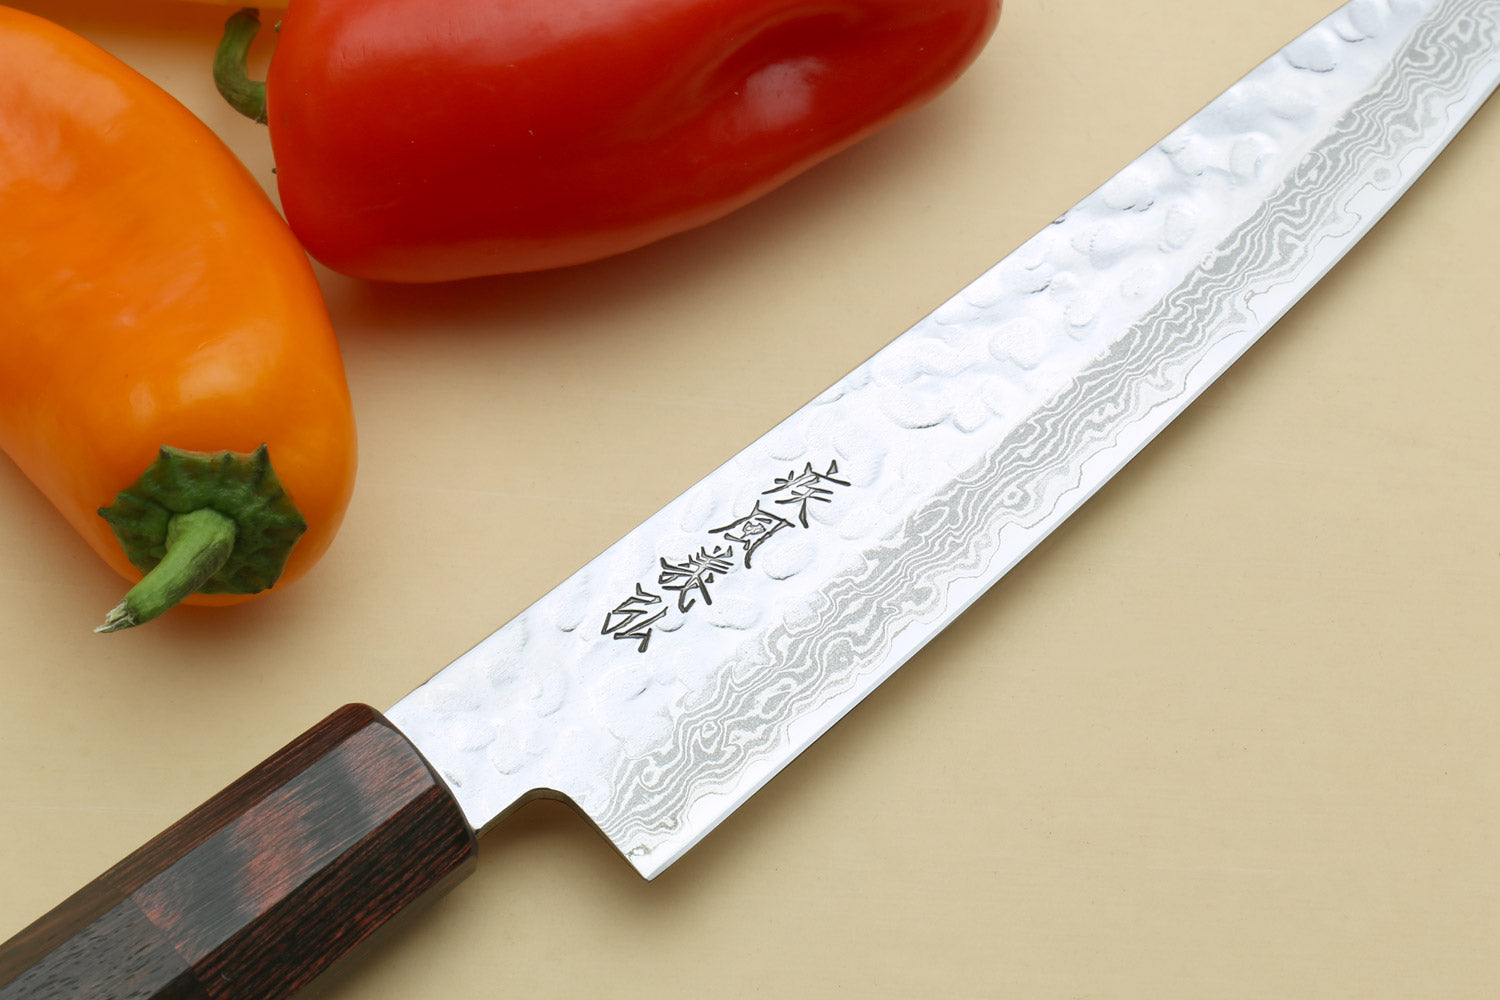 10 Inch Japanese Damascus Pattern Stainless Steel Chef Knife Excellent  rosewood